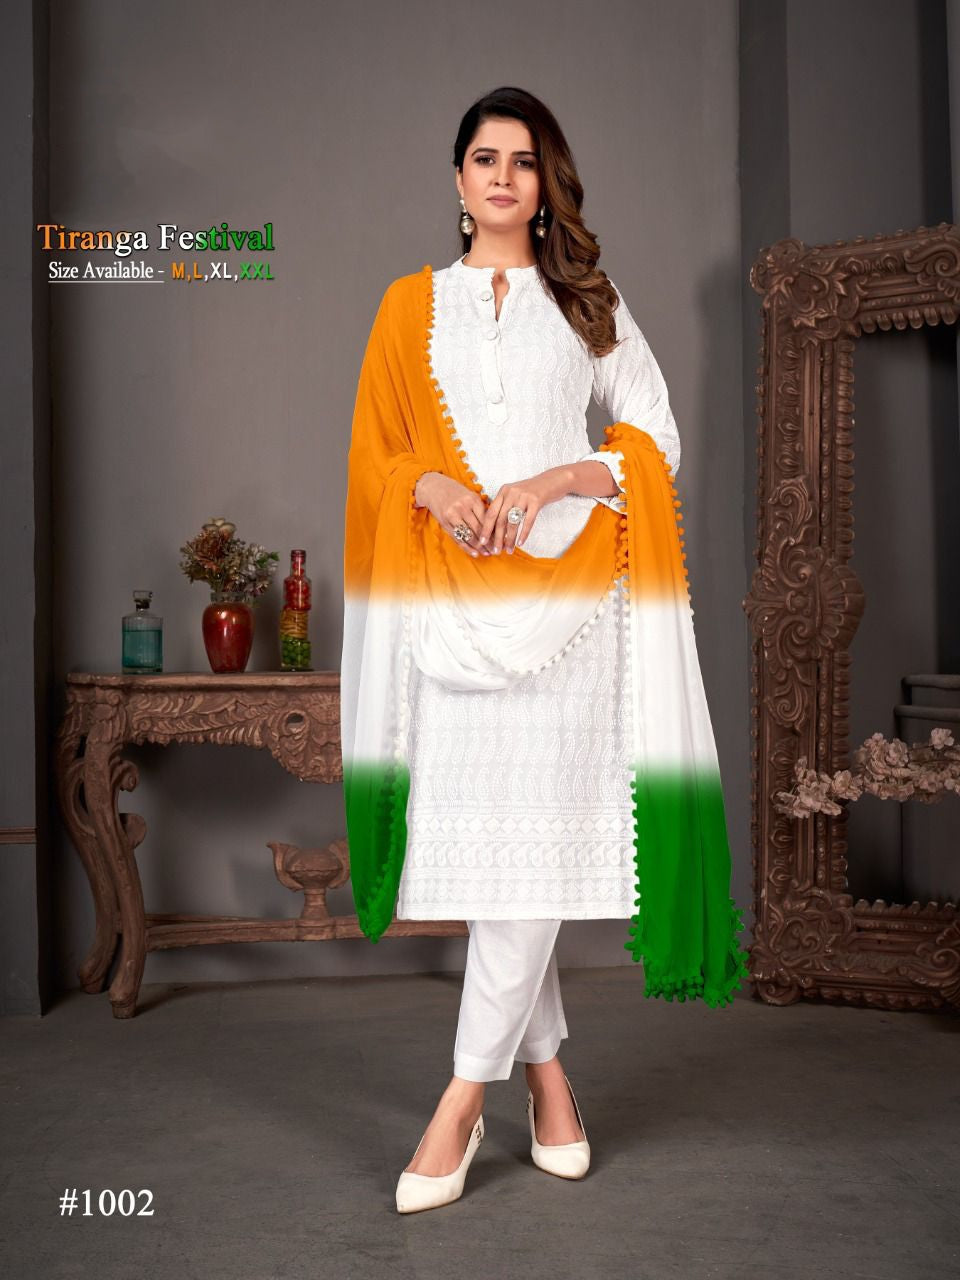 Buy PI World Independence Day Special Three Color Combo Cotton Patiala  Salwar (Pants) for Women Free Size Multicolour at Amazon.in